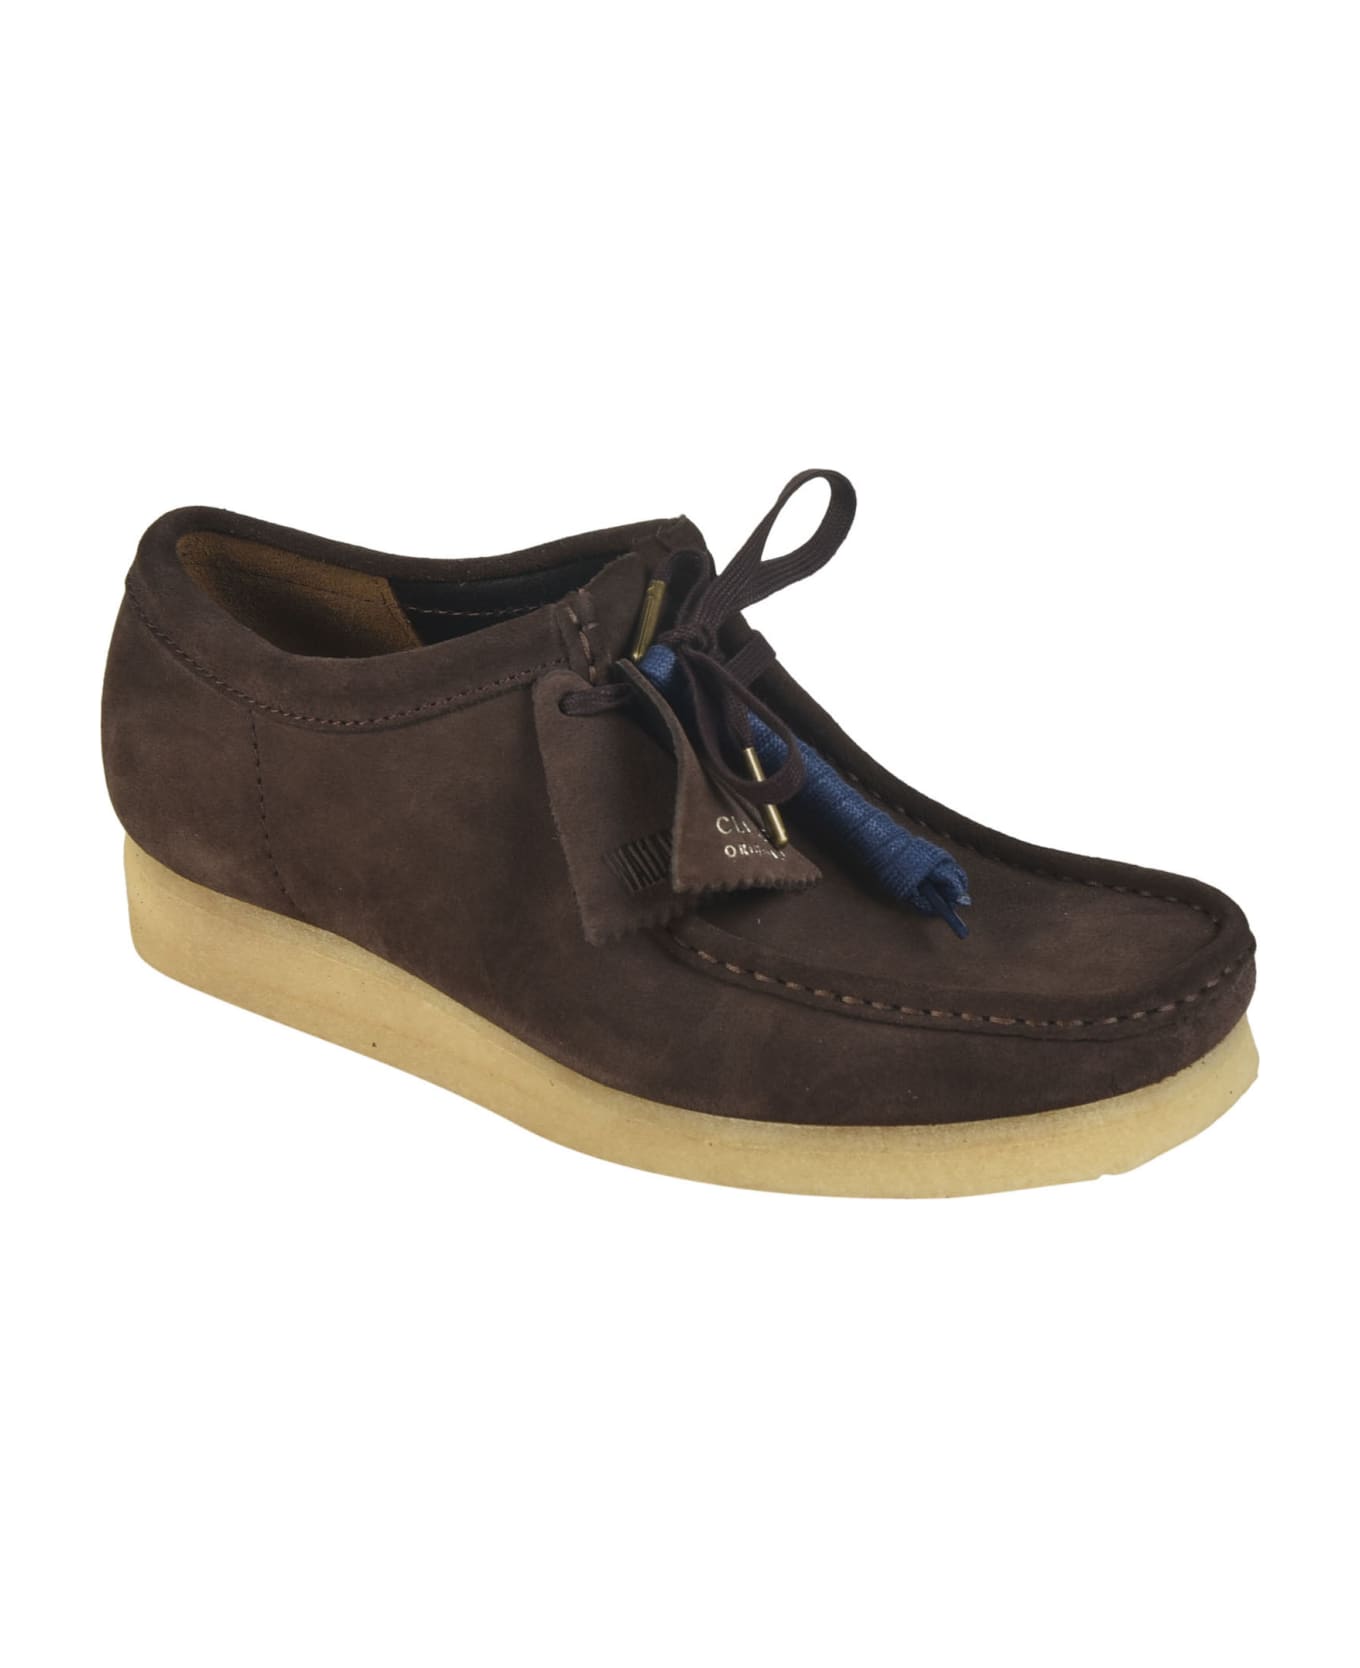 Clarks Tag Detail Loafers - Brown